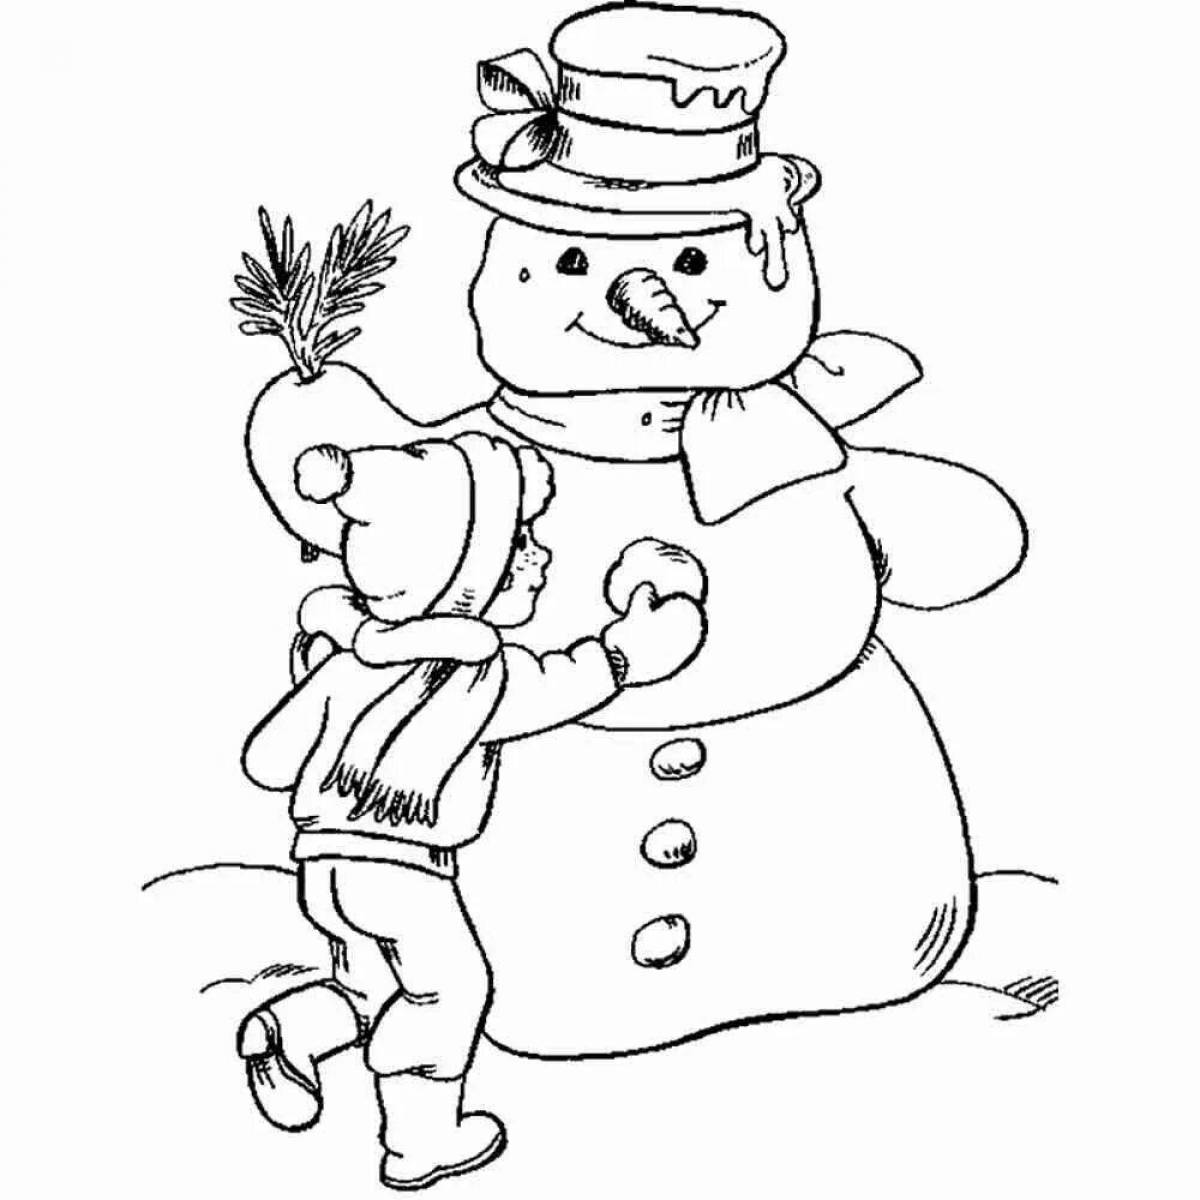 Glamorous snowman coloring book for children 5 years old